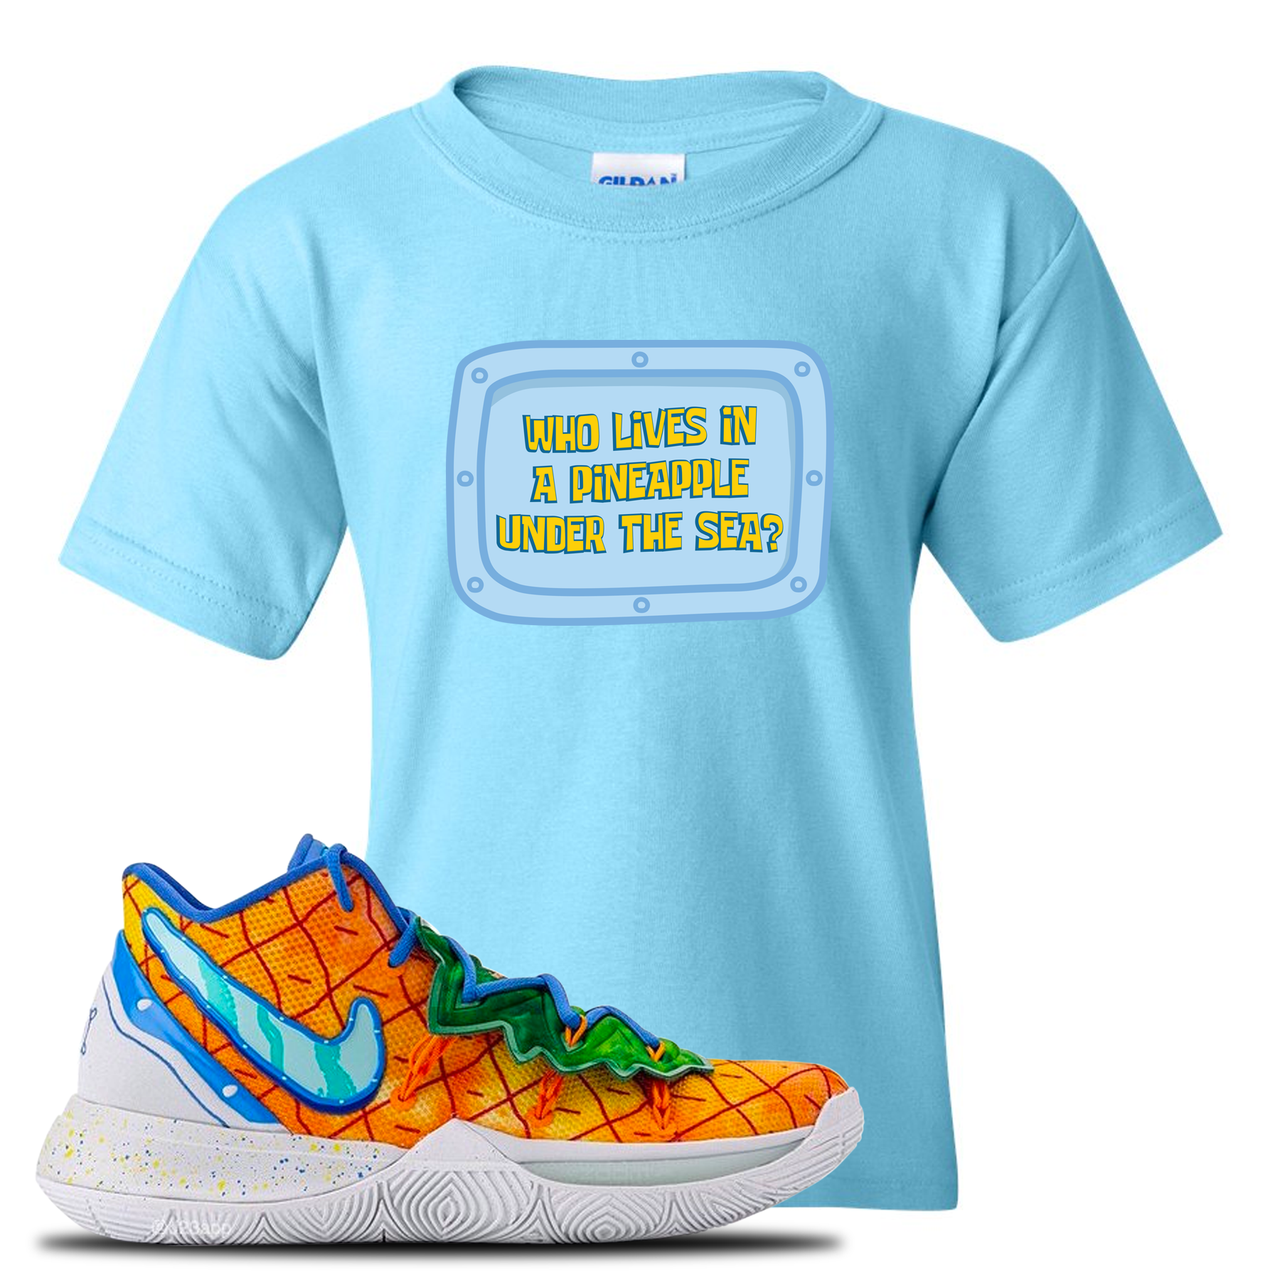 Kyrie 5 Pineapple House Who Lives in a Pineapple Under the Sea? Sky Blue Sneaker Hook Up Kid's T-Shirt